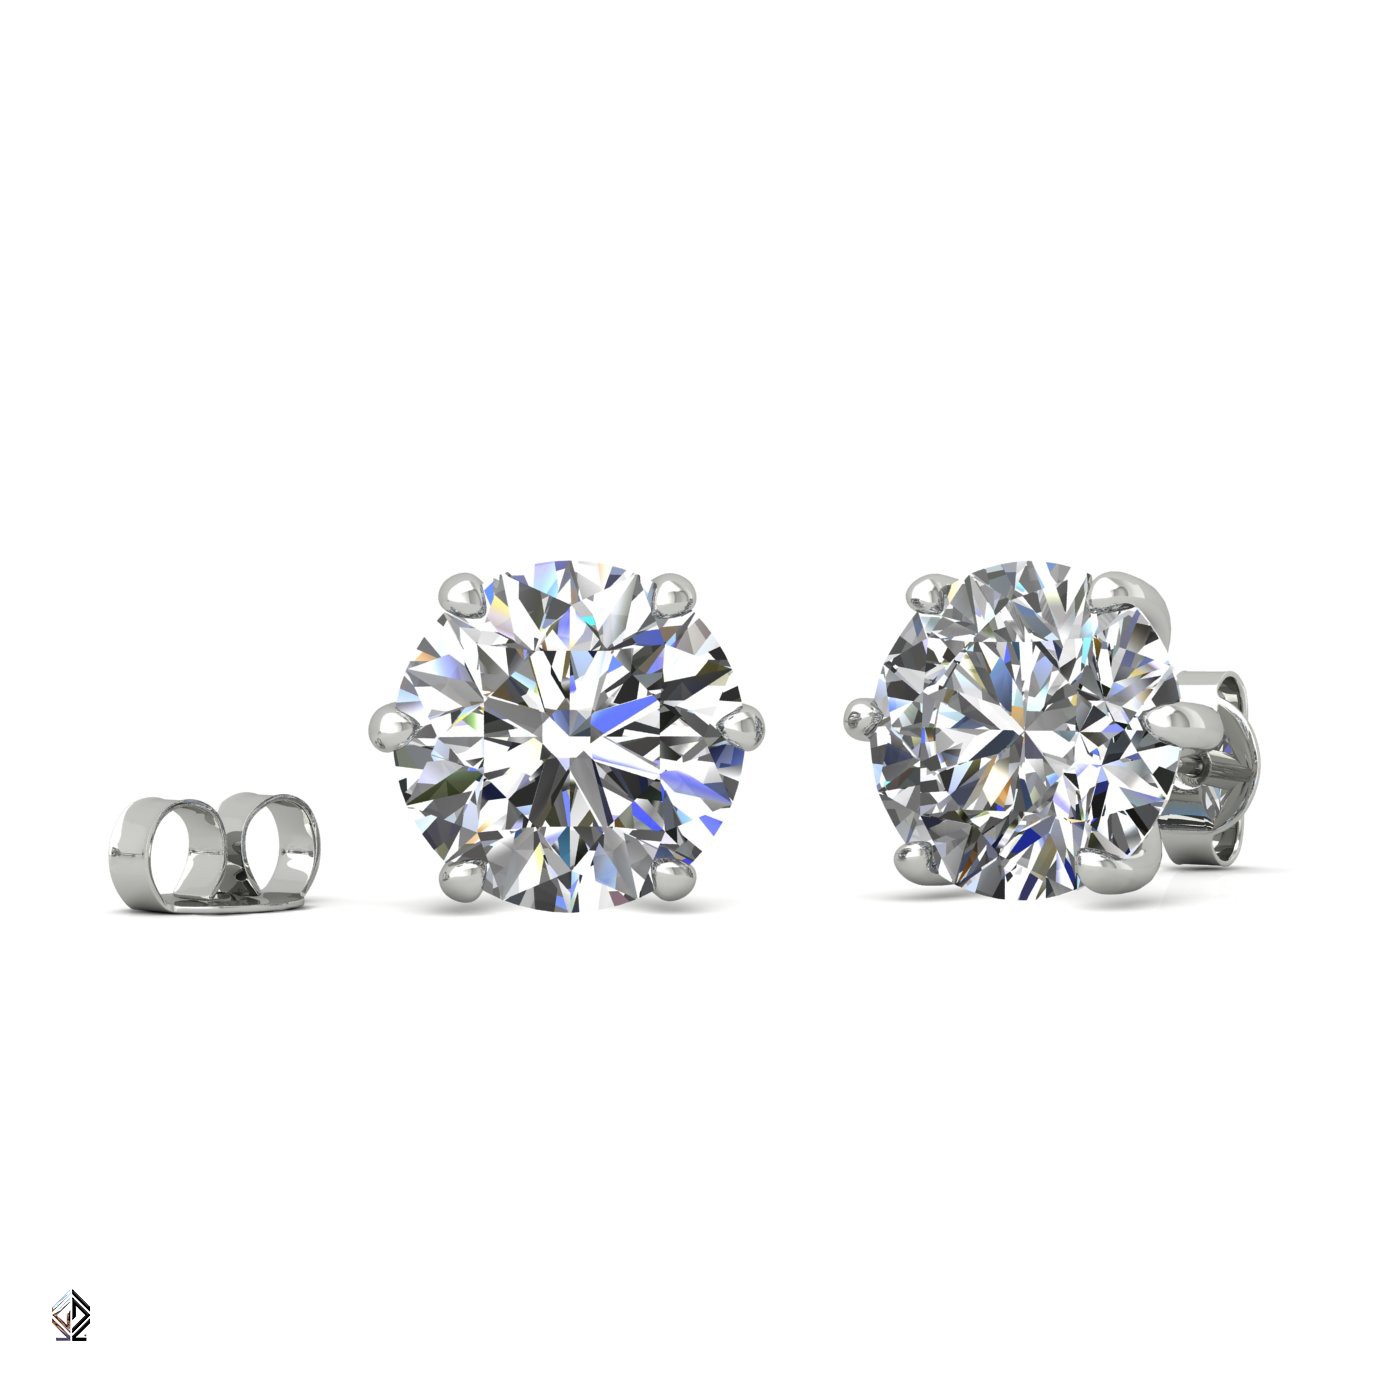 18k white gold 0,3 ct each (0,6 tcw) 6 prongs round shape diamond earrings Photos & images